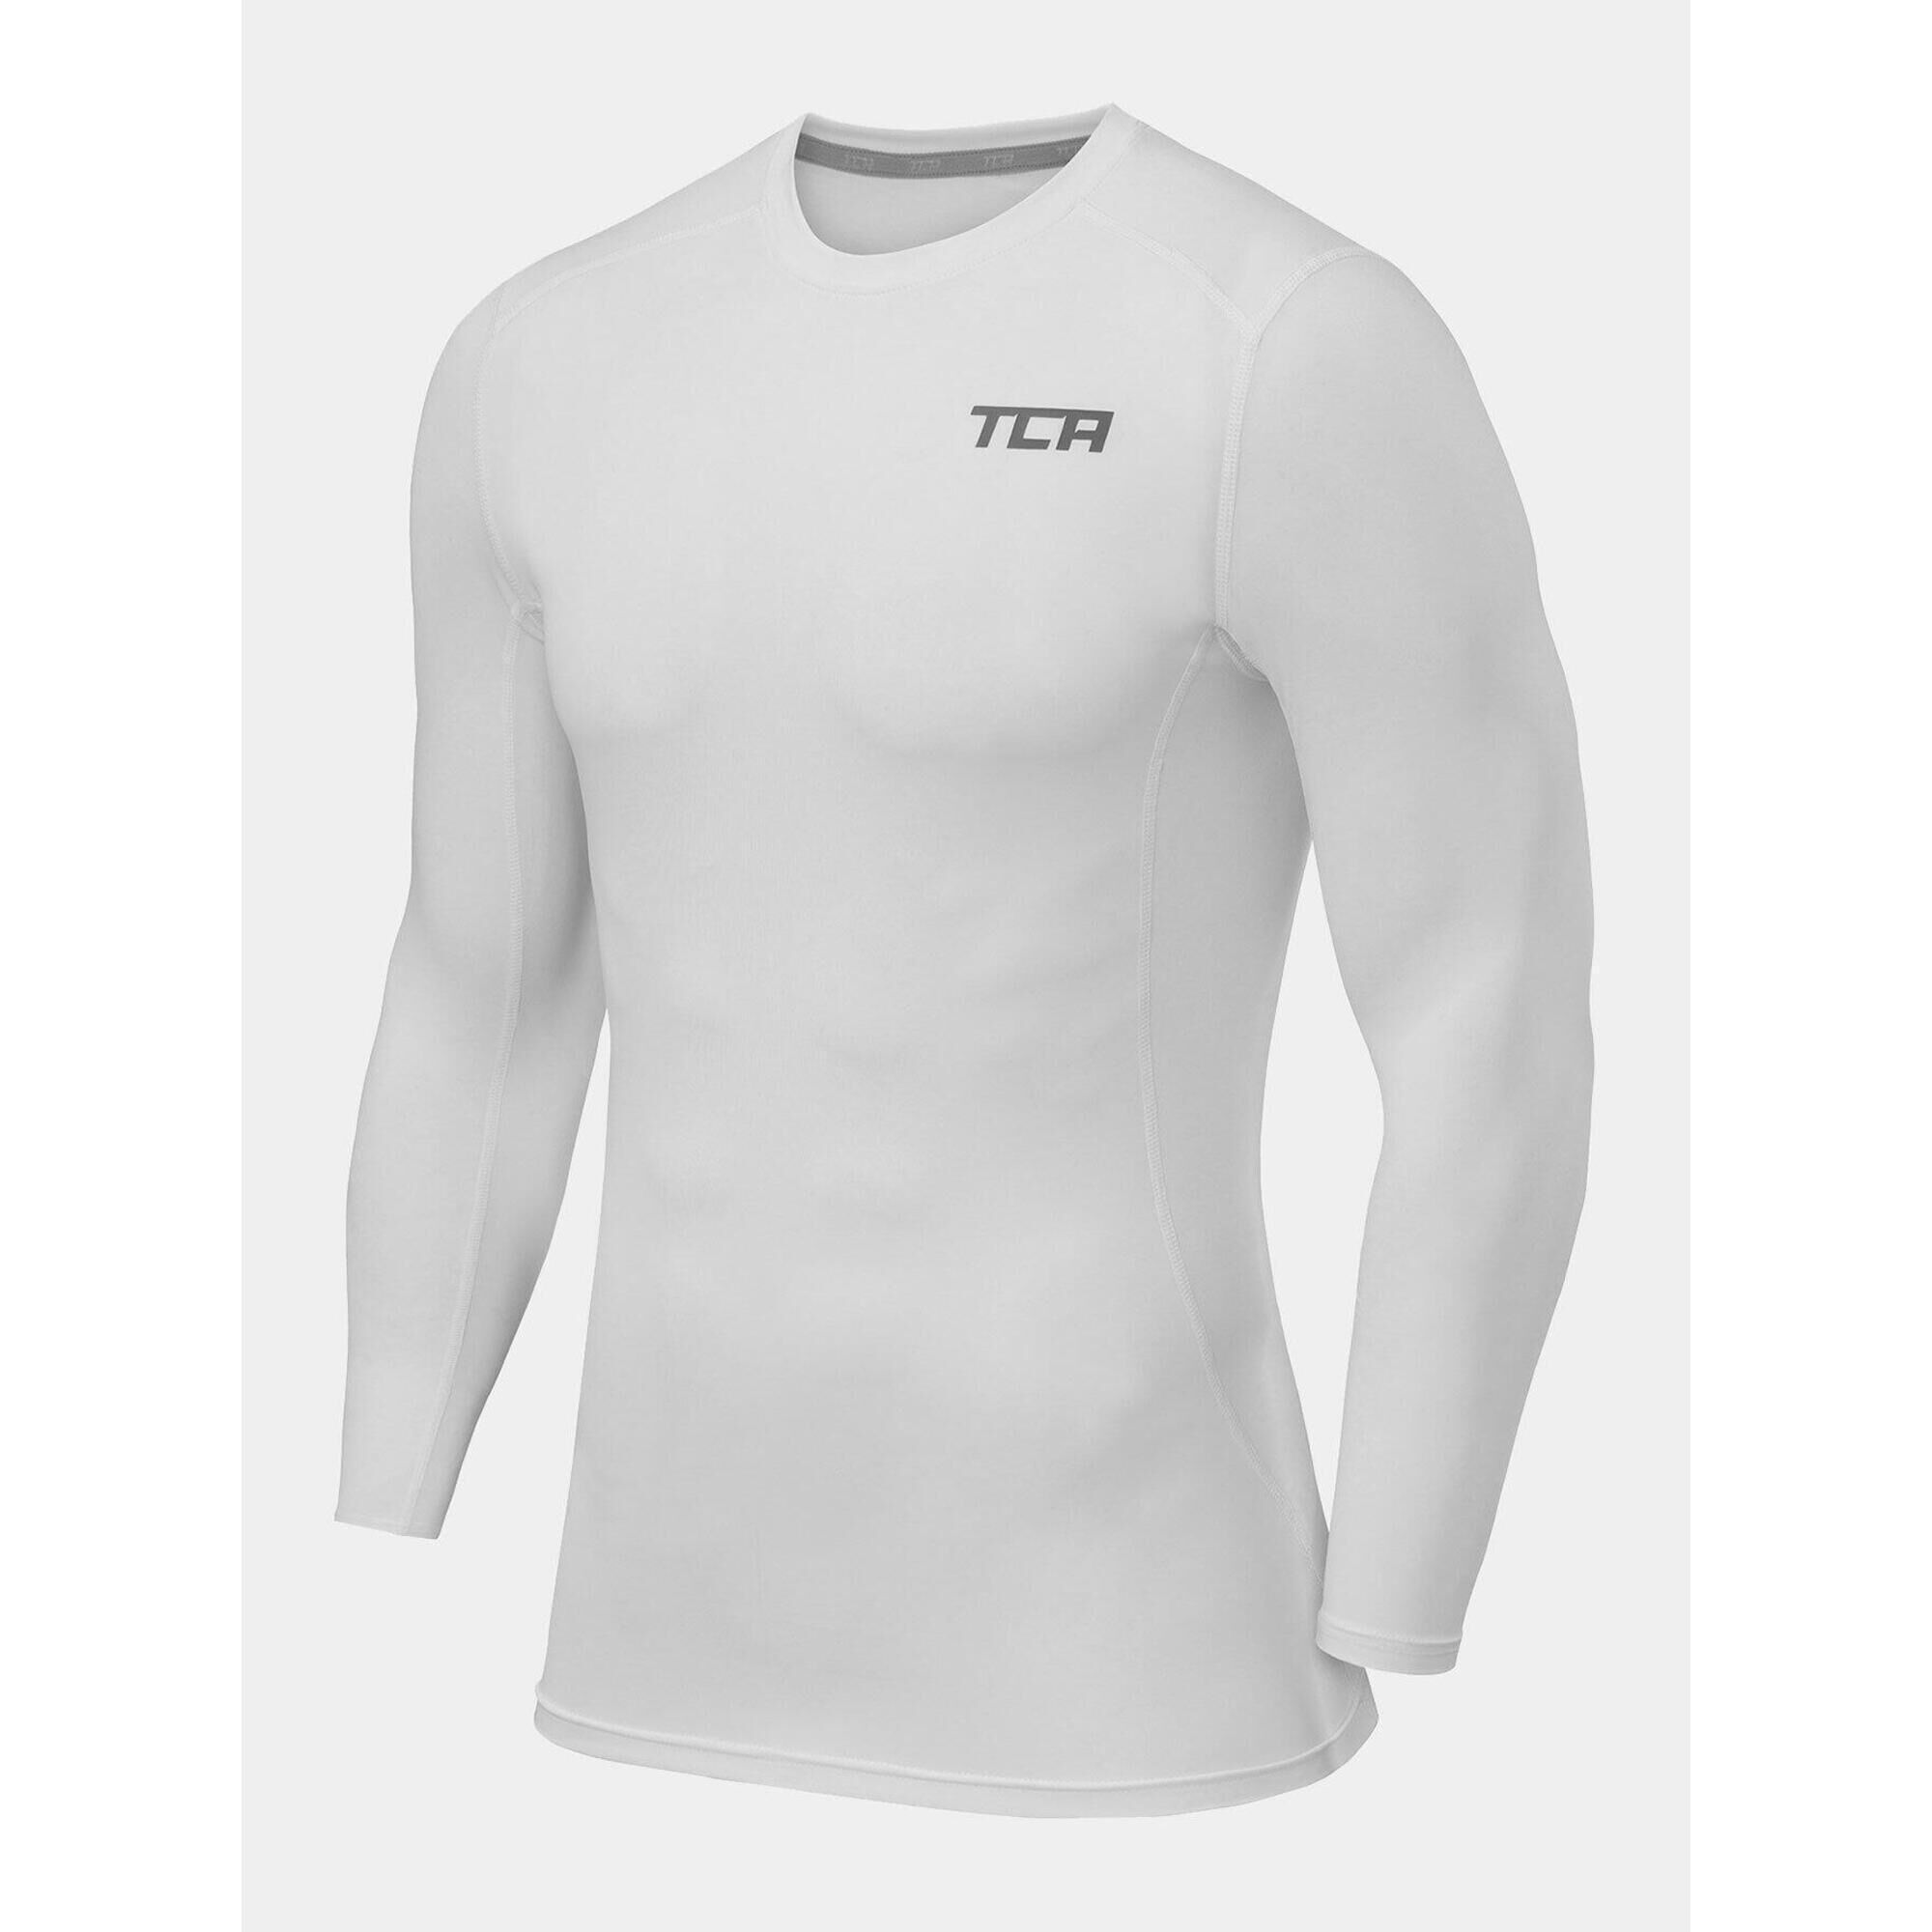 TCA Men's Power Base Layer Compression Long Sleeve Top - Pro White